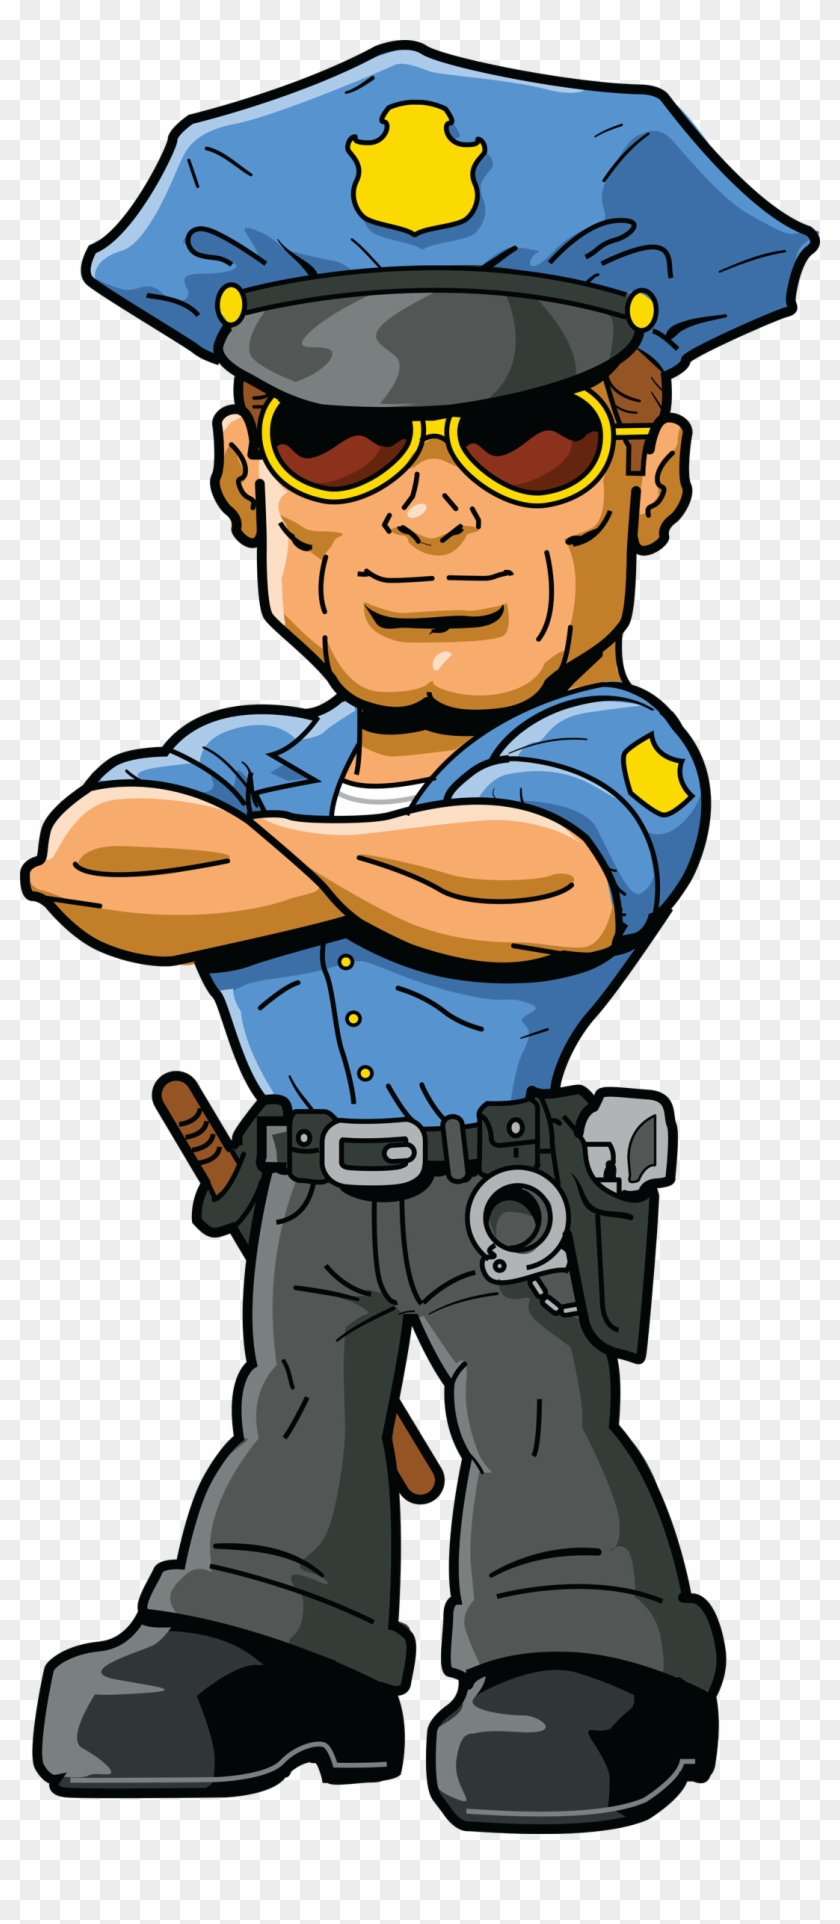 Police Officer Cartoon Clip Art - Police Officer Cartoon Clip Art - Free  Transparent PNG Clipart Images Download